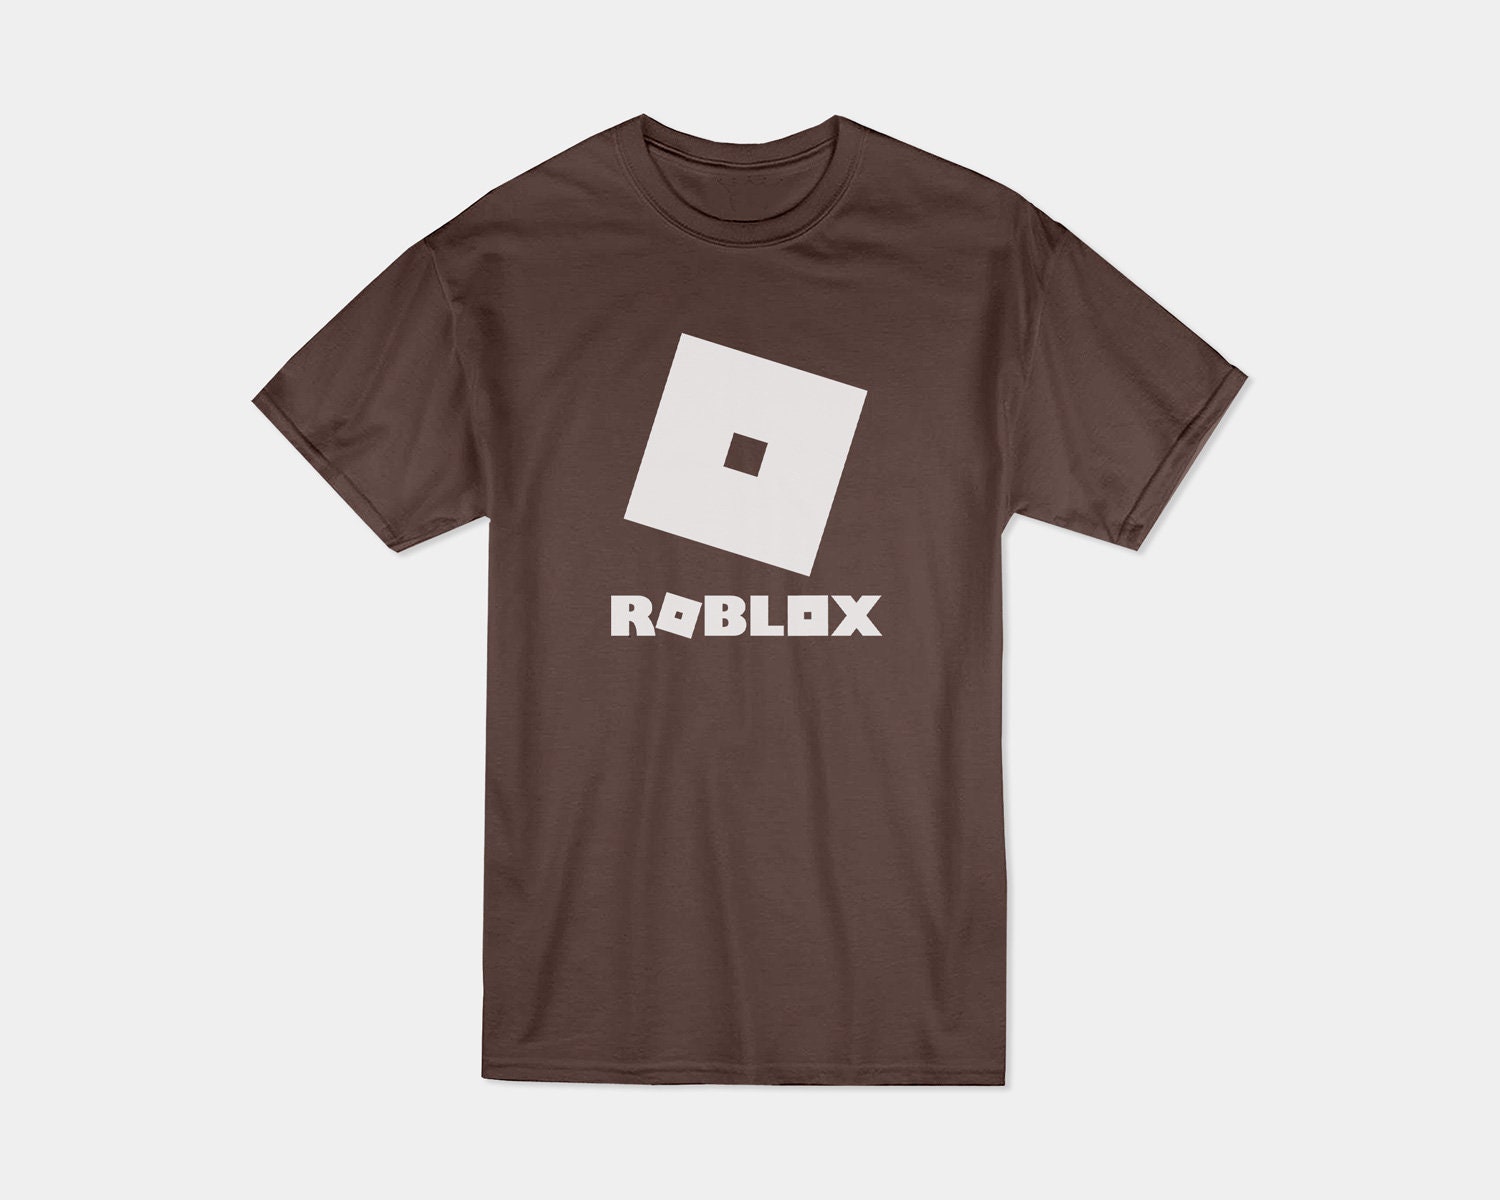 How To Create Your Own Shirt On Roblox Buyudum Cocuk Oldum - how to sell your own t shirt on roblox buyudum cocuk oldum